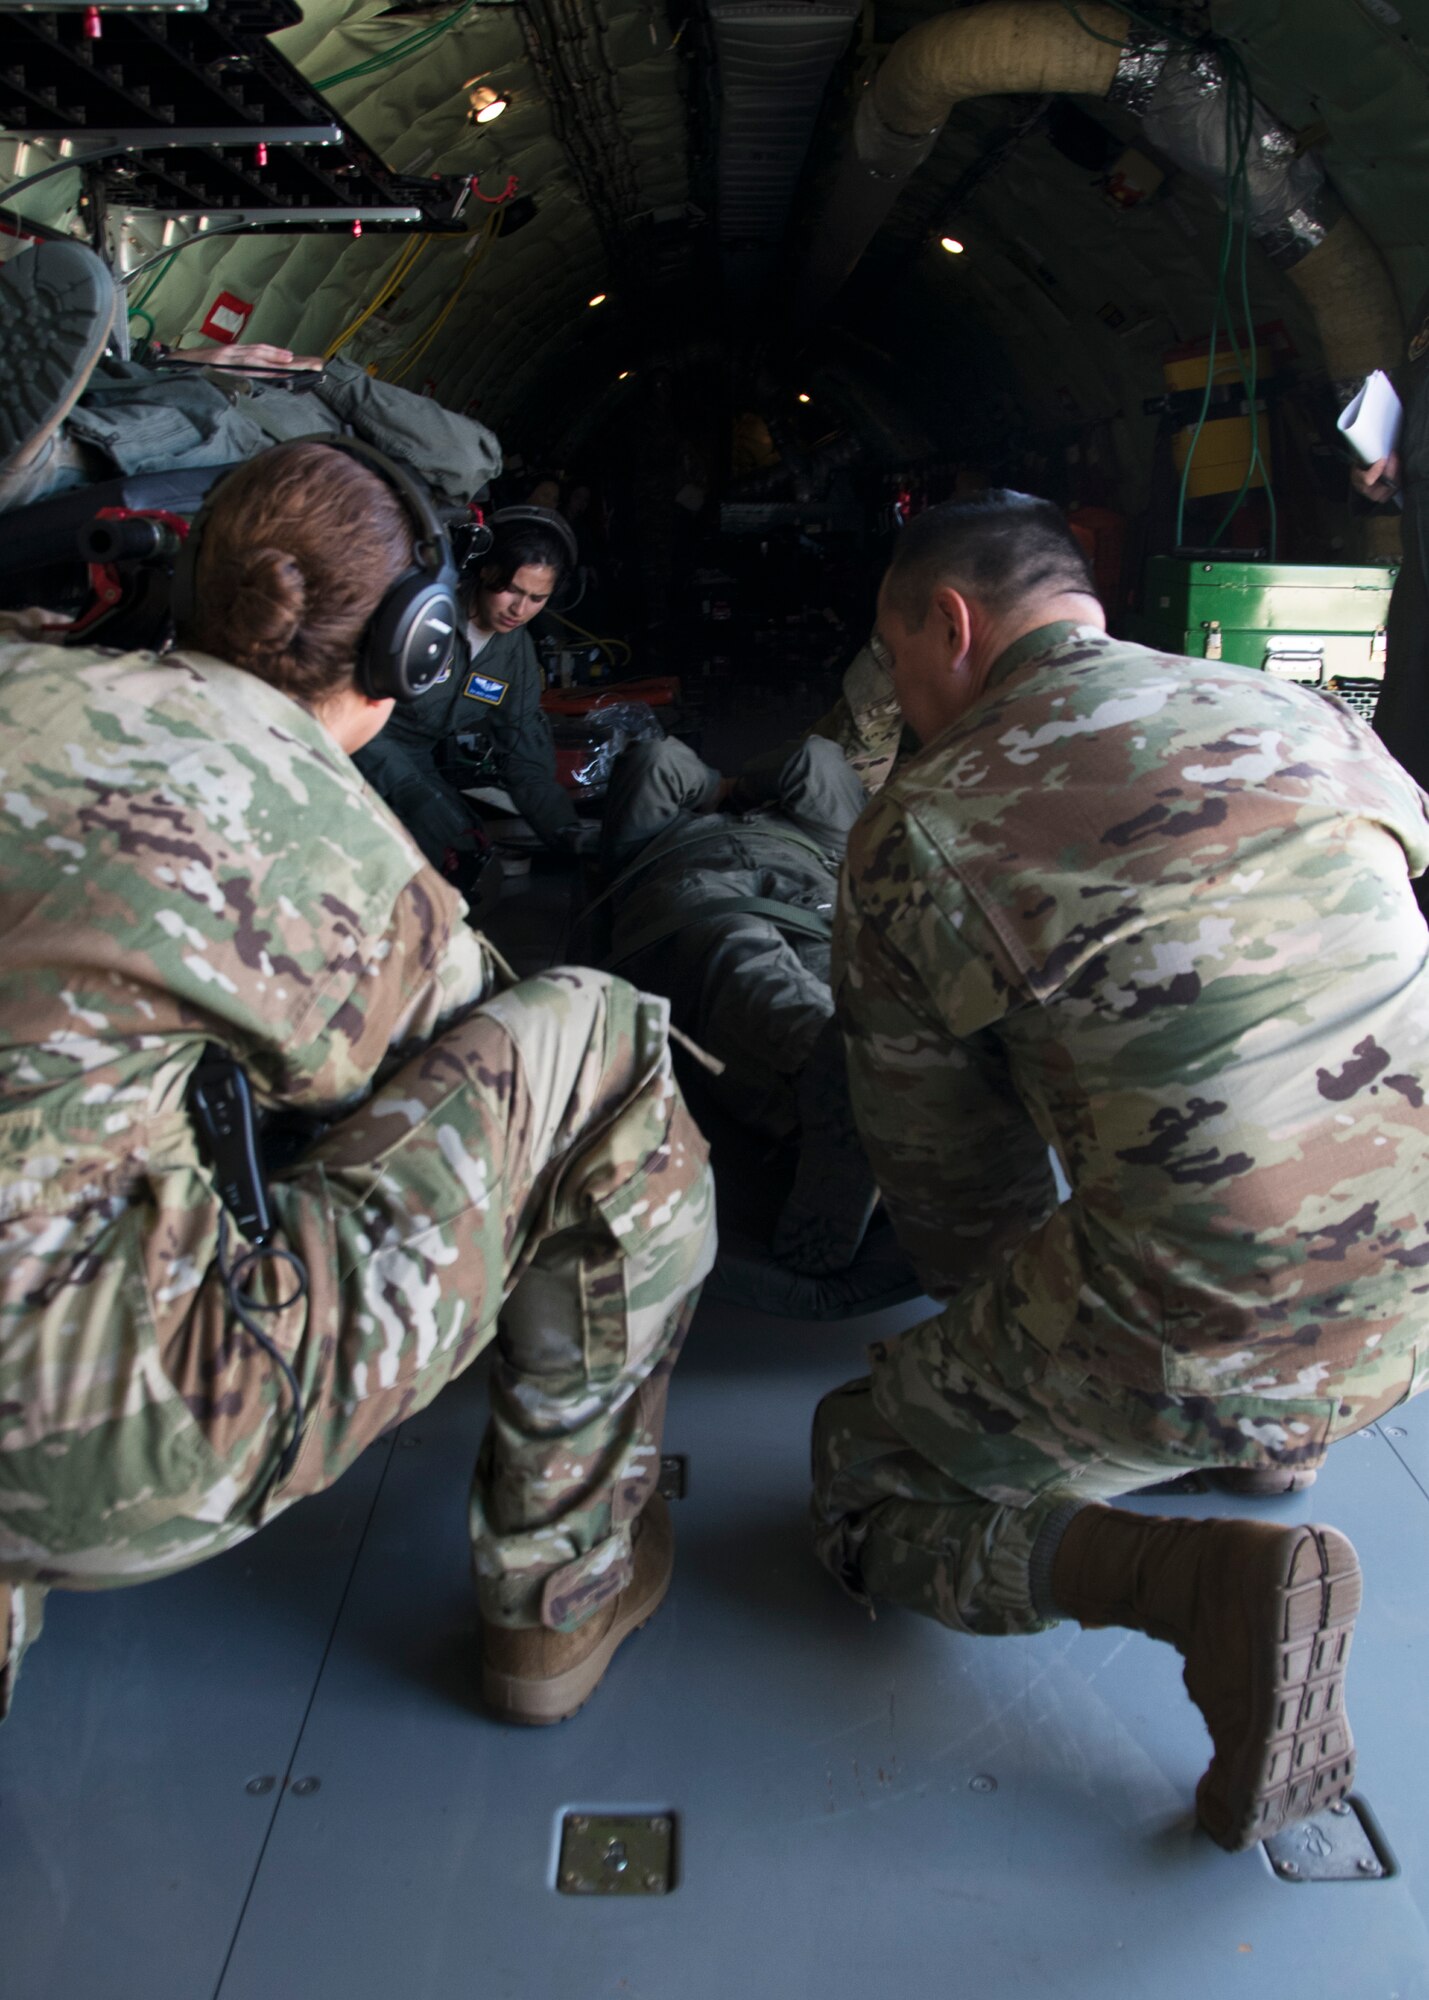 Members of the 459th Aeromedical Evacuation Squadron prepare to place a patient onto a Stanchion Litter System in preparation for an off station trainer Sept. 20, 2019 at Joint Base Andrews, Md. The team participates in local and off station training missions about twice a month to ensure humanitarian and deployment mission readiness. (U.S. Air Force photo by Staff Sgt. Cierra Presentado/Released)